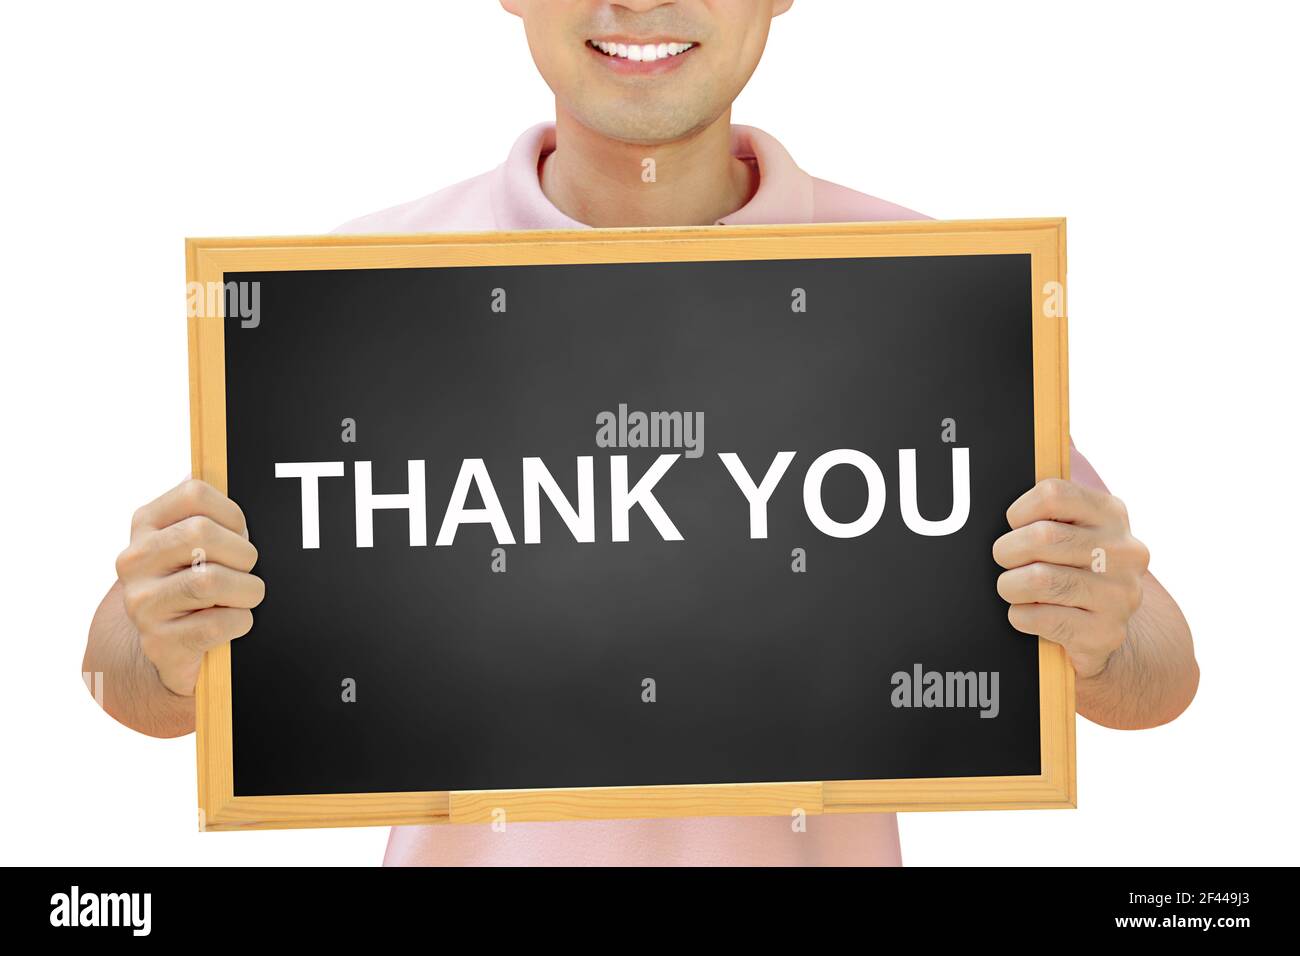 THANK YOU words on blackboard held by smiling man Stock Photo